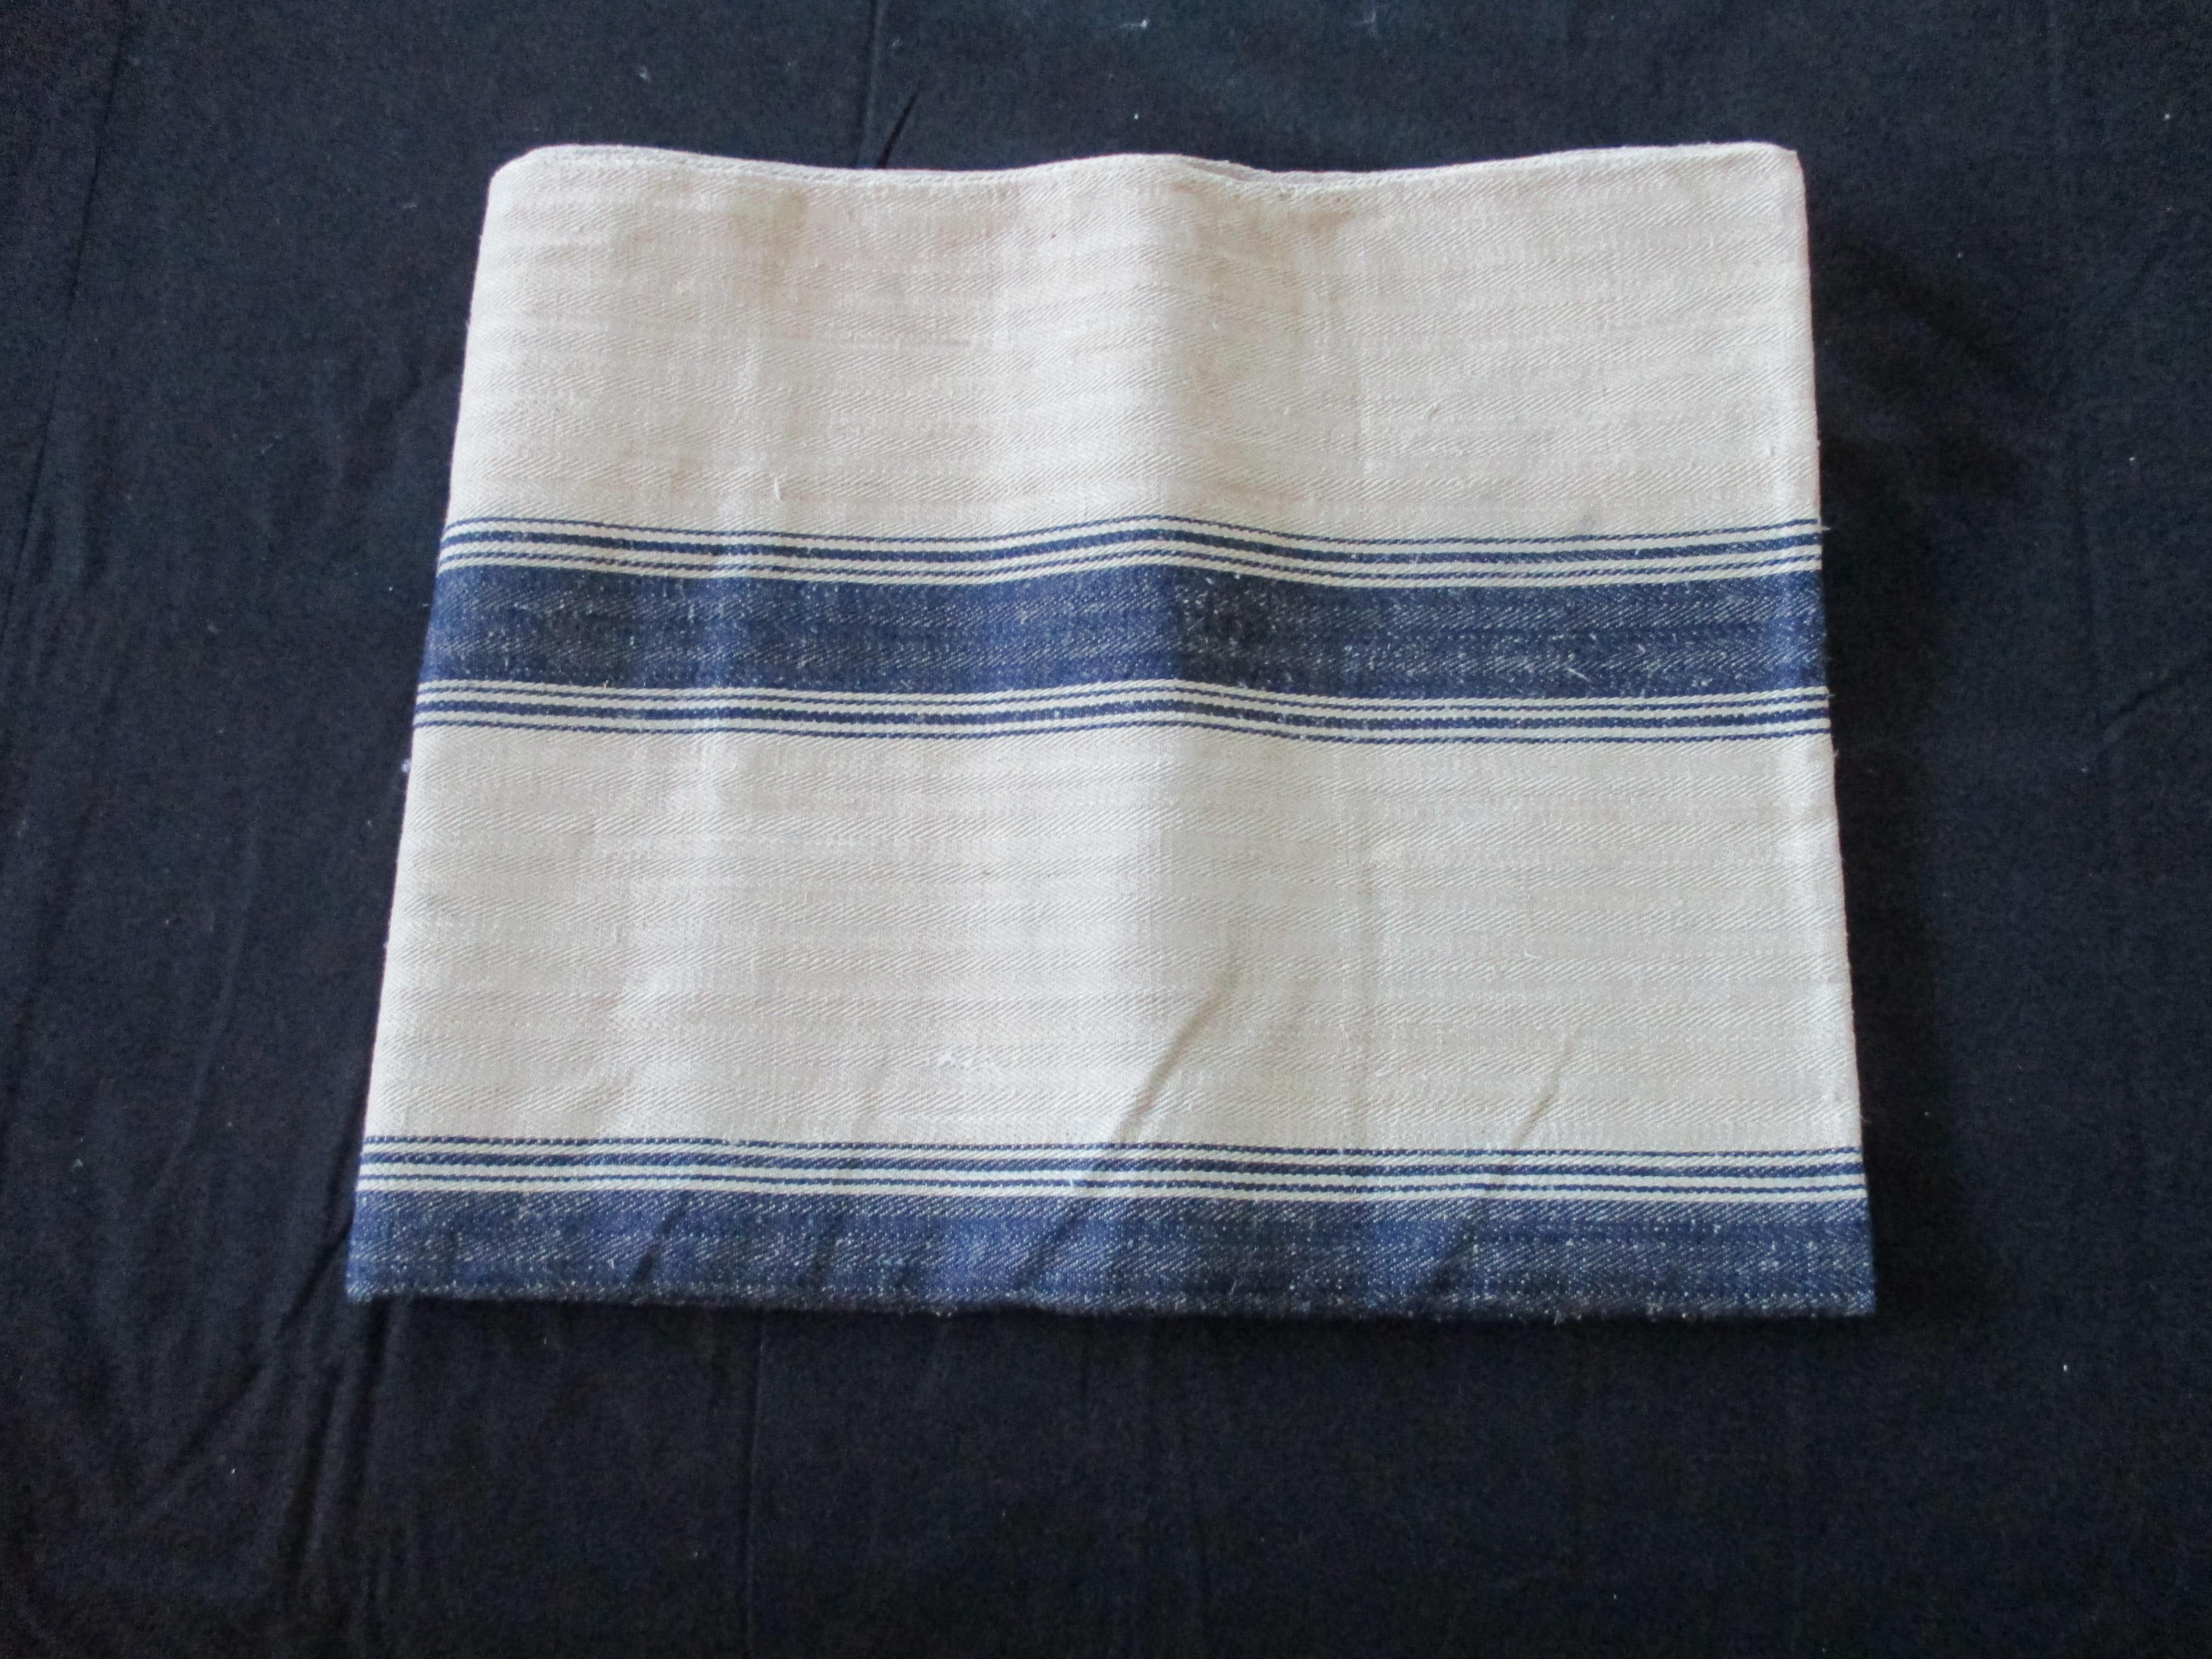 Antique French Grain Sack with Indigo and Natural Stripes.
Ideal for pillows or upholstery.
Size: 34.5 L x 28